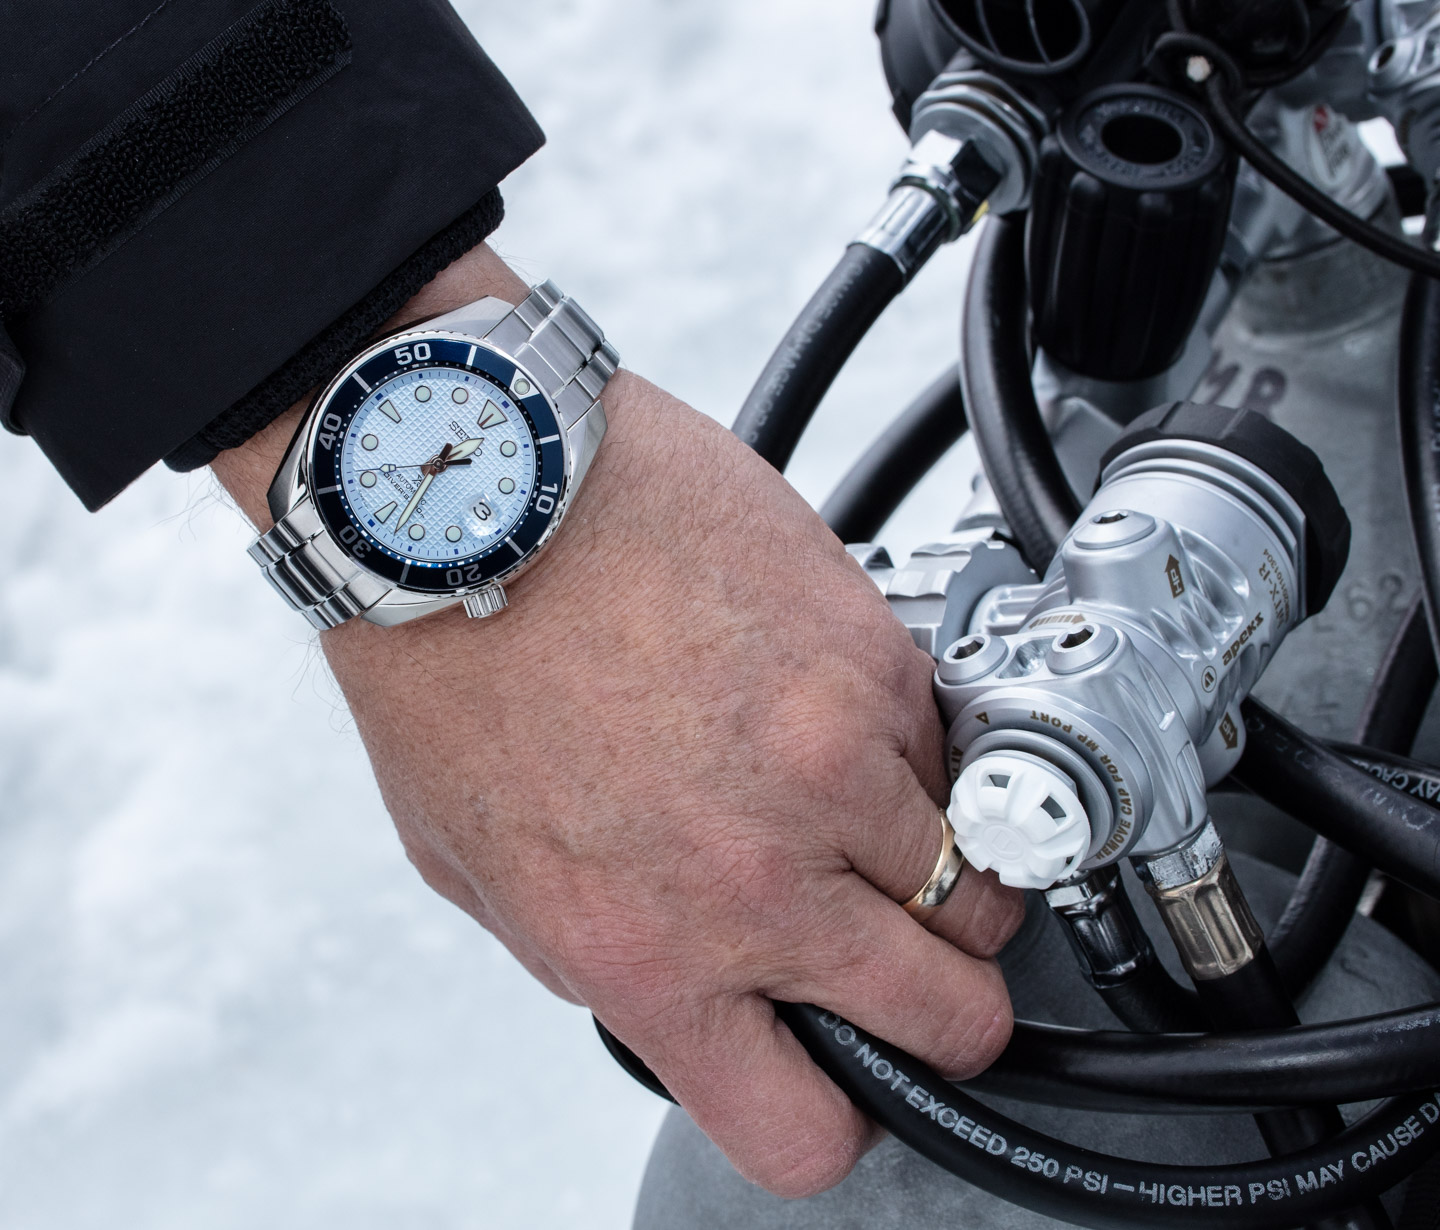 Journey To See The Seiko Prospex Ice Diver Watches In Action | aBlogtoWatch